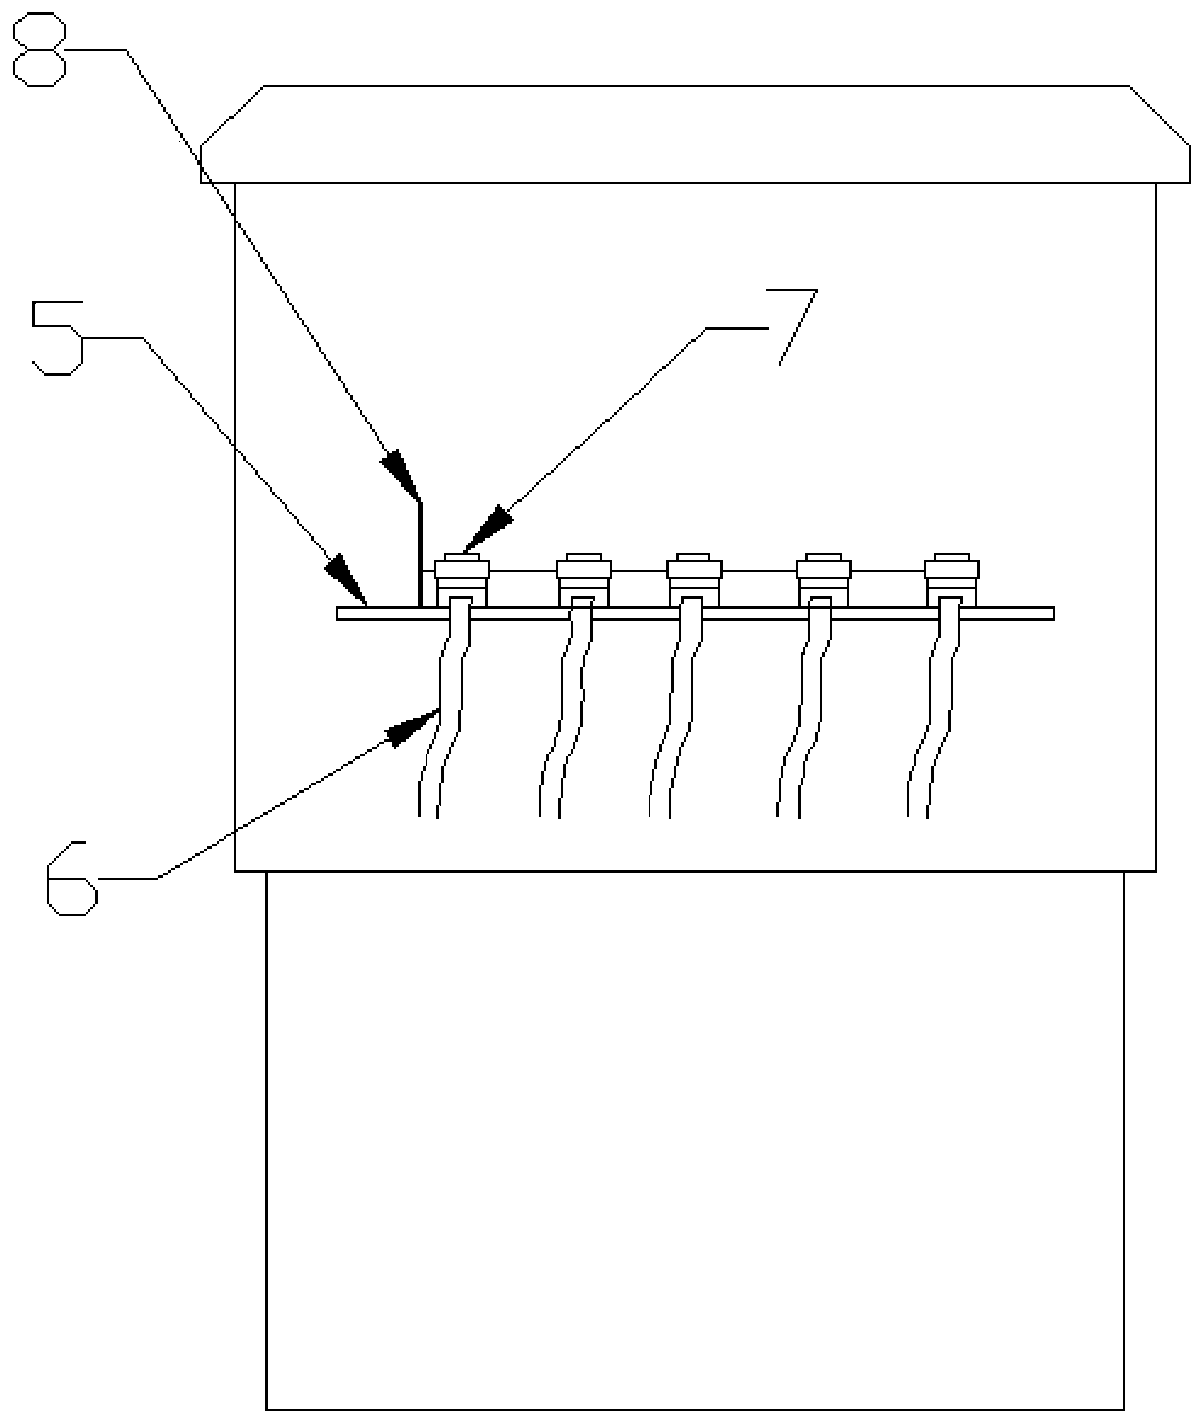 A cable branch box convenient for wiring